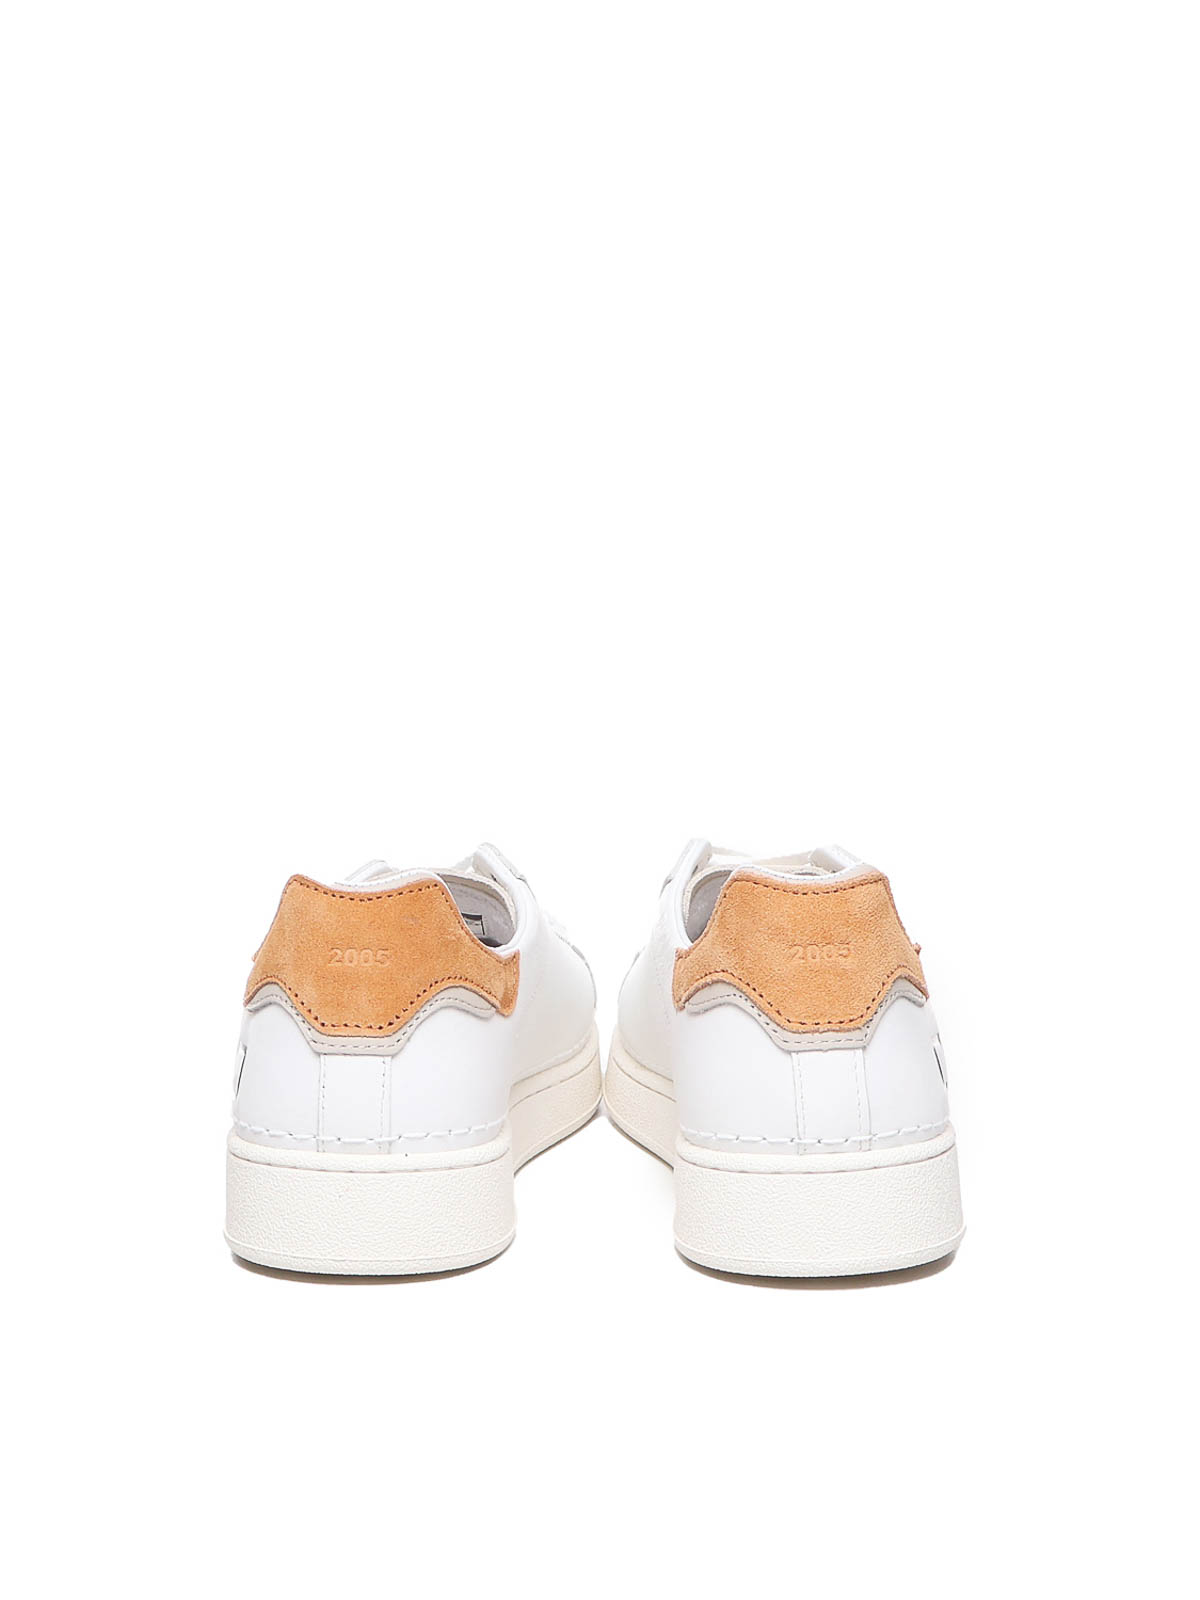 Shop Date Calfskin Sneakers In Taupe